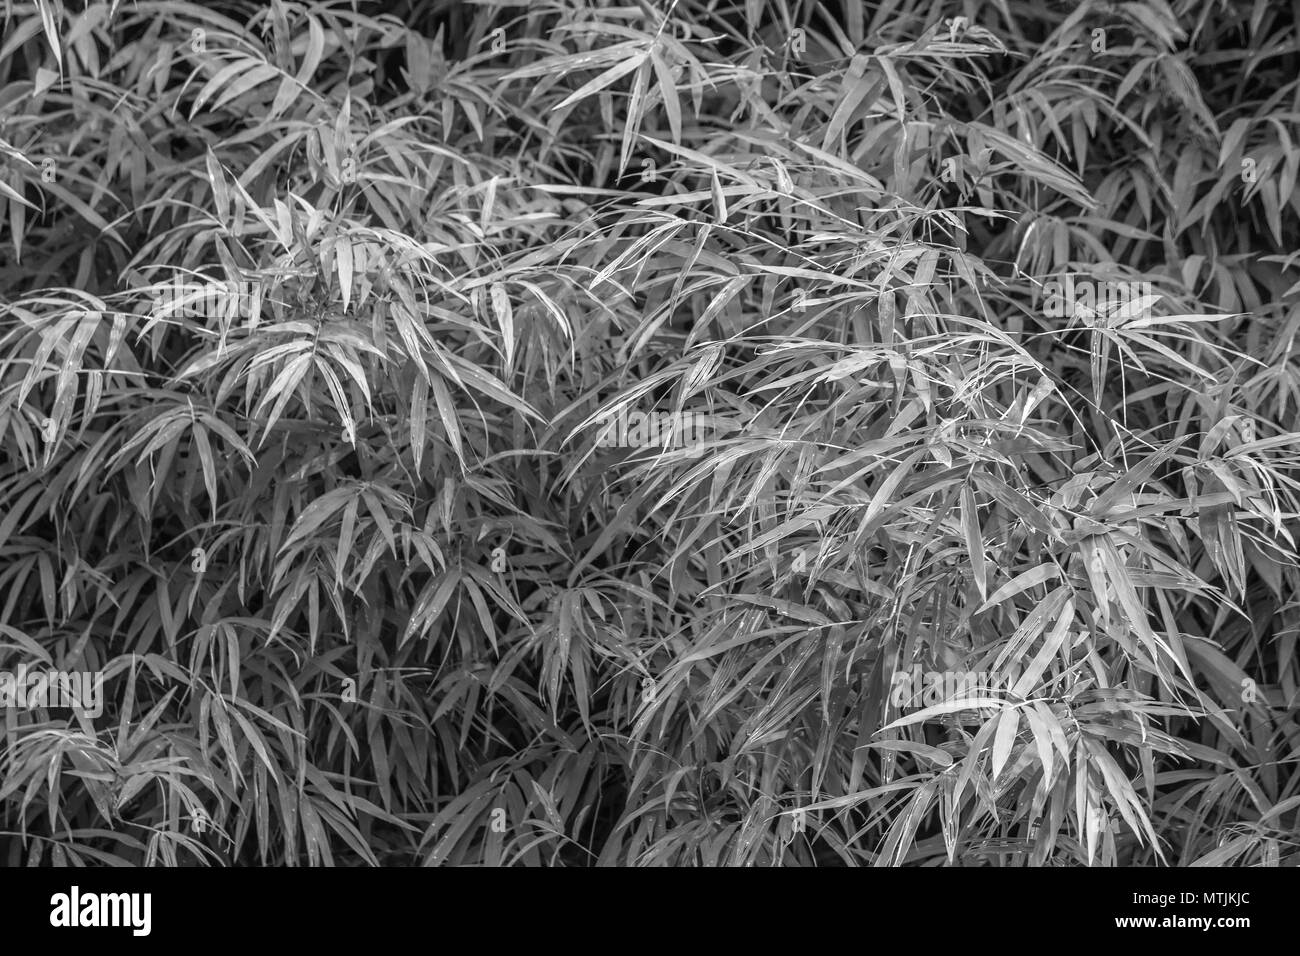 Black and white Bamboo leaves pattern texture background. Stock Photo